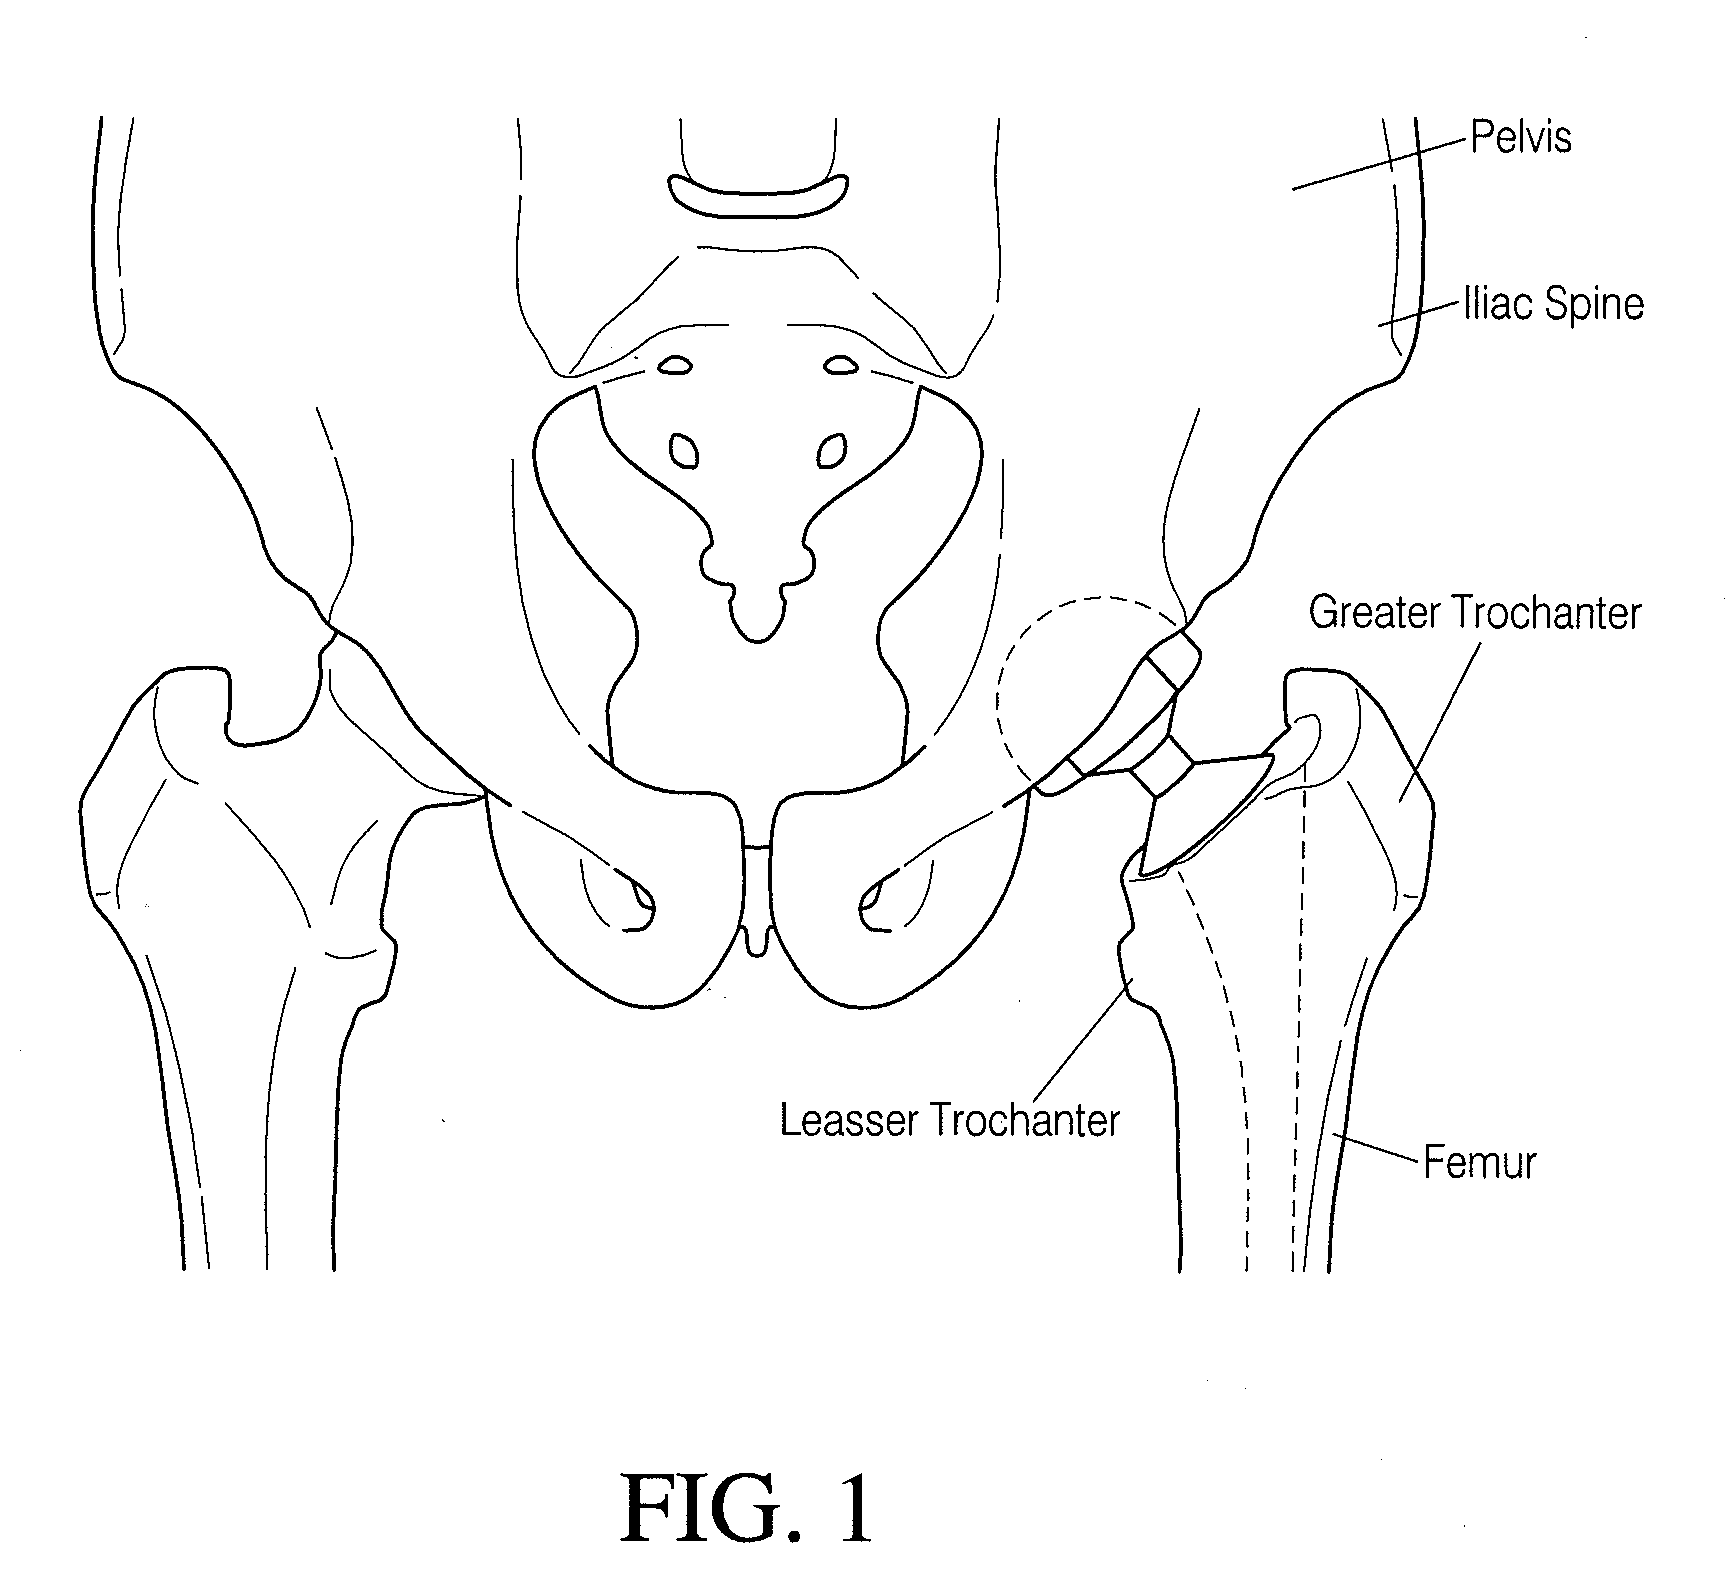 Hip surgery systems and methods